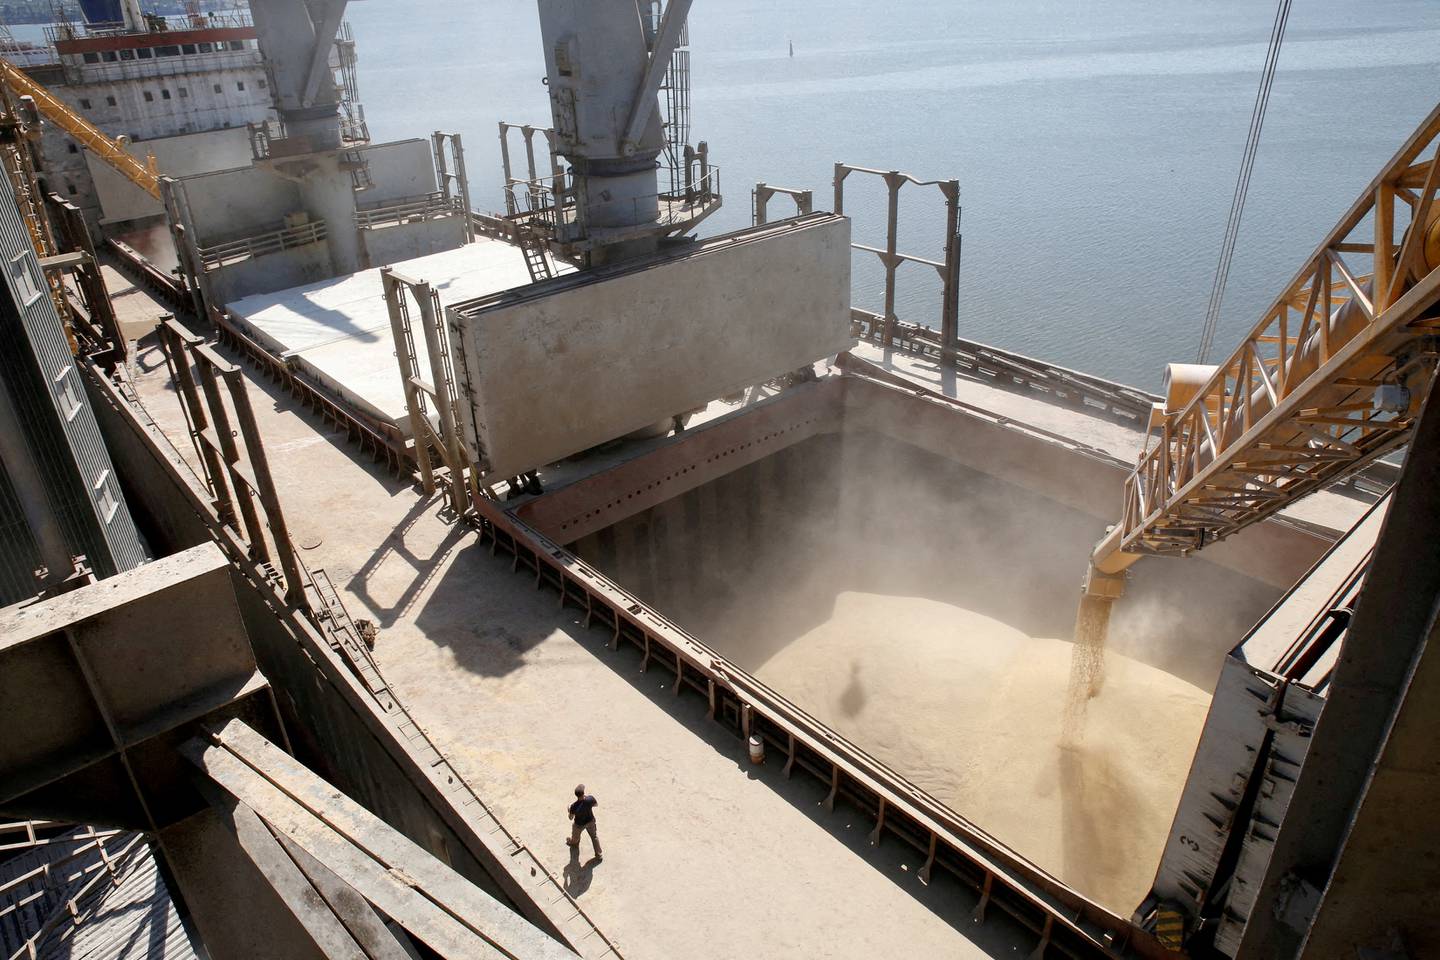 A dockyard worker watches as barley grain is mechanically poured into a 40,000 tonne ship in Nikolaev, Ukraine. Since the start of the war, weekly port calls have gone from 60 to almost zero in Ukraine. Reuters/ File  